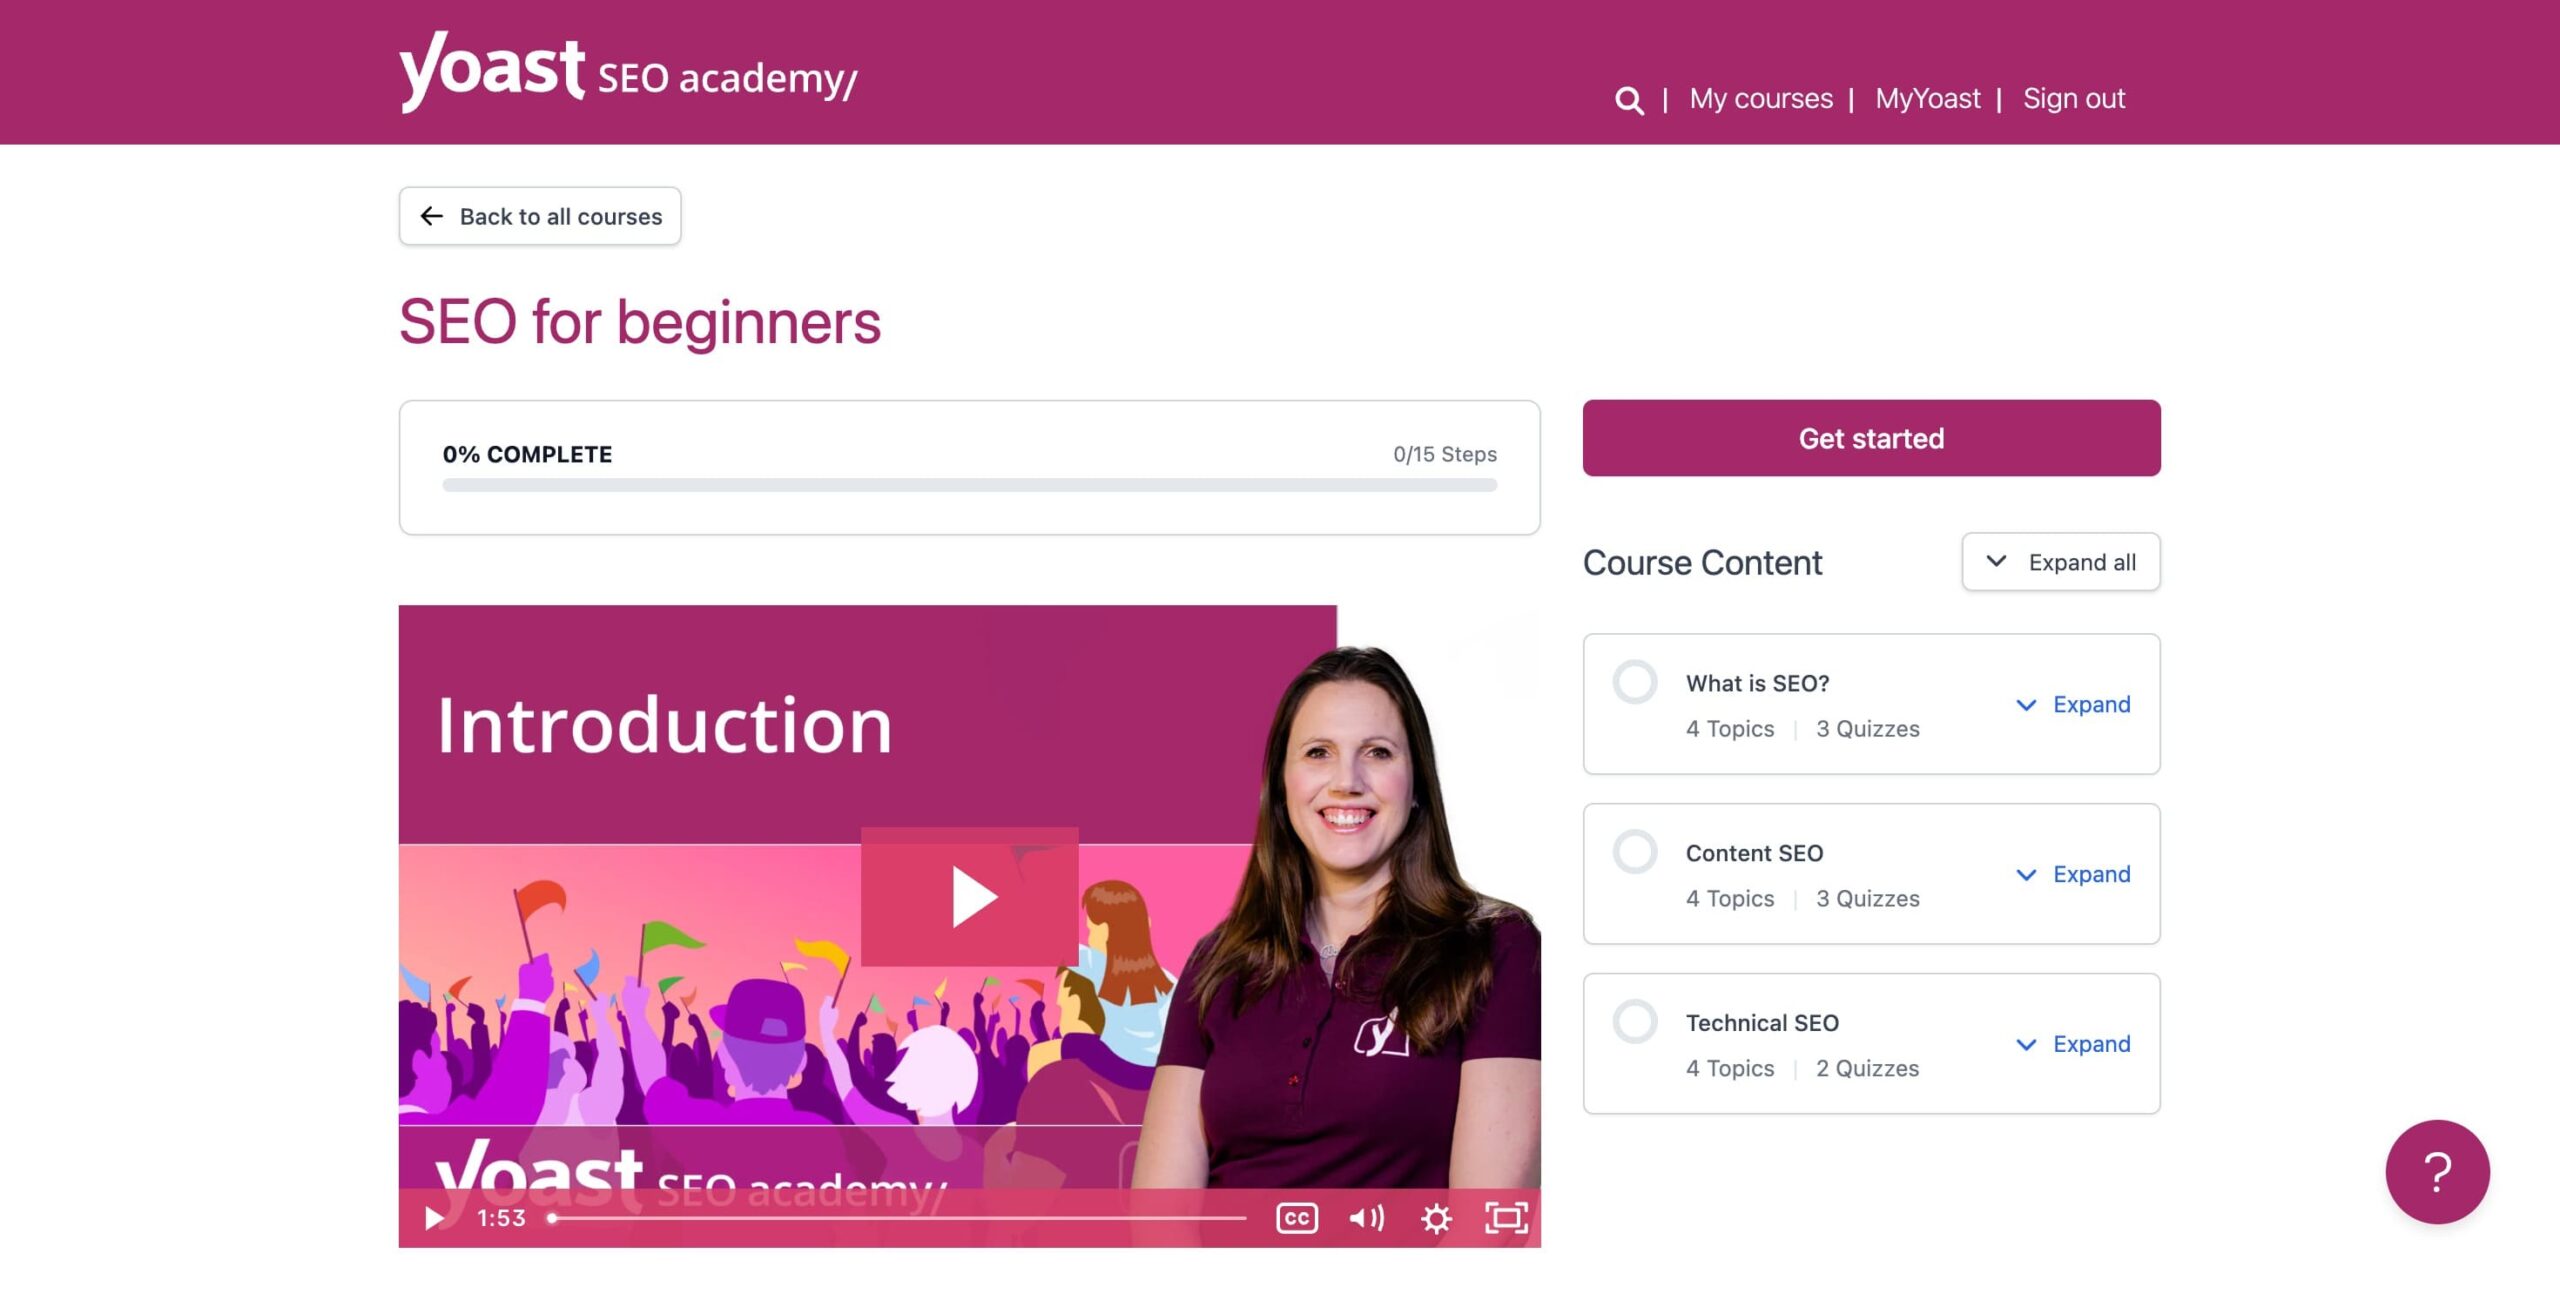 seo for beginners by yoast academy